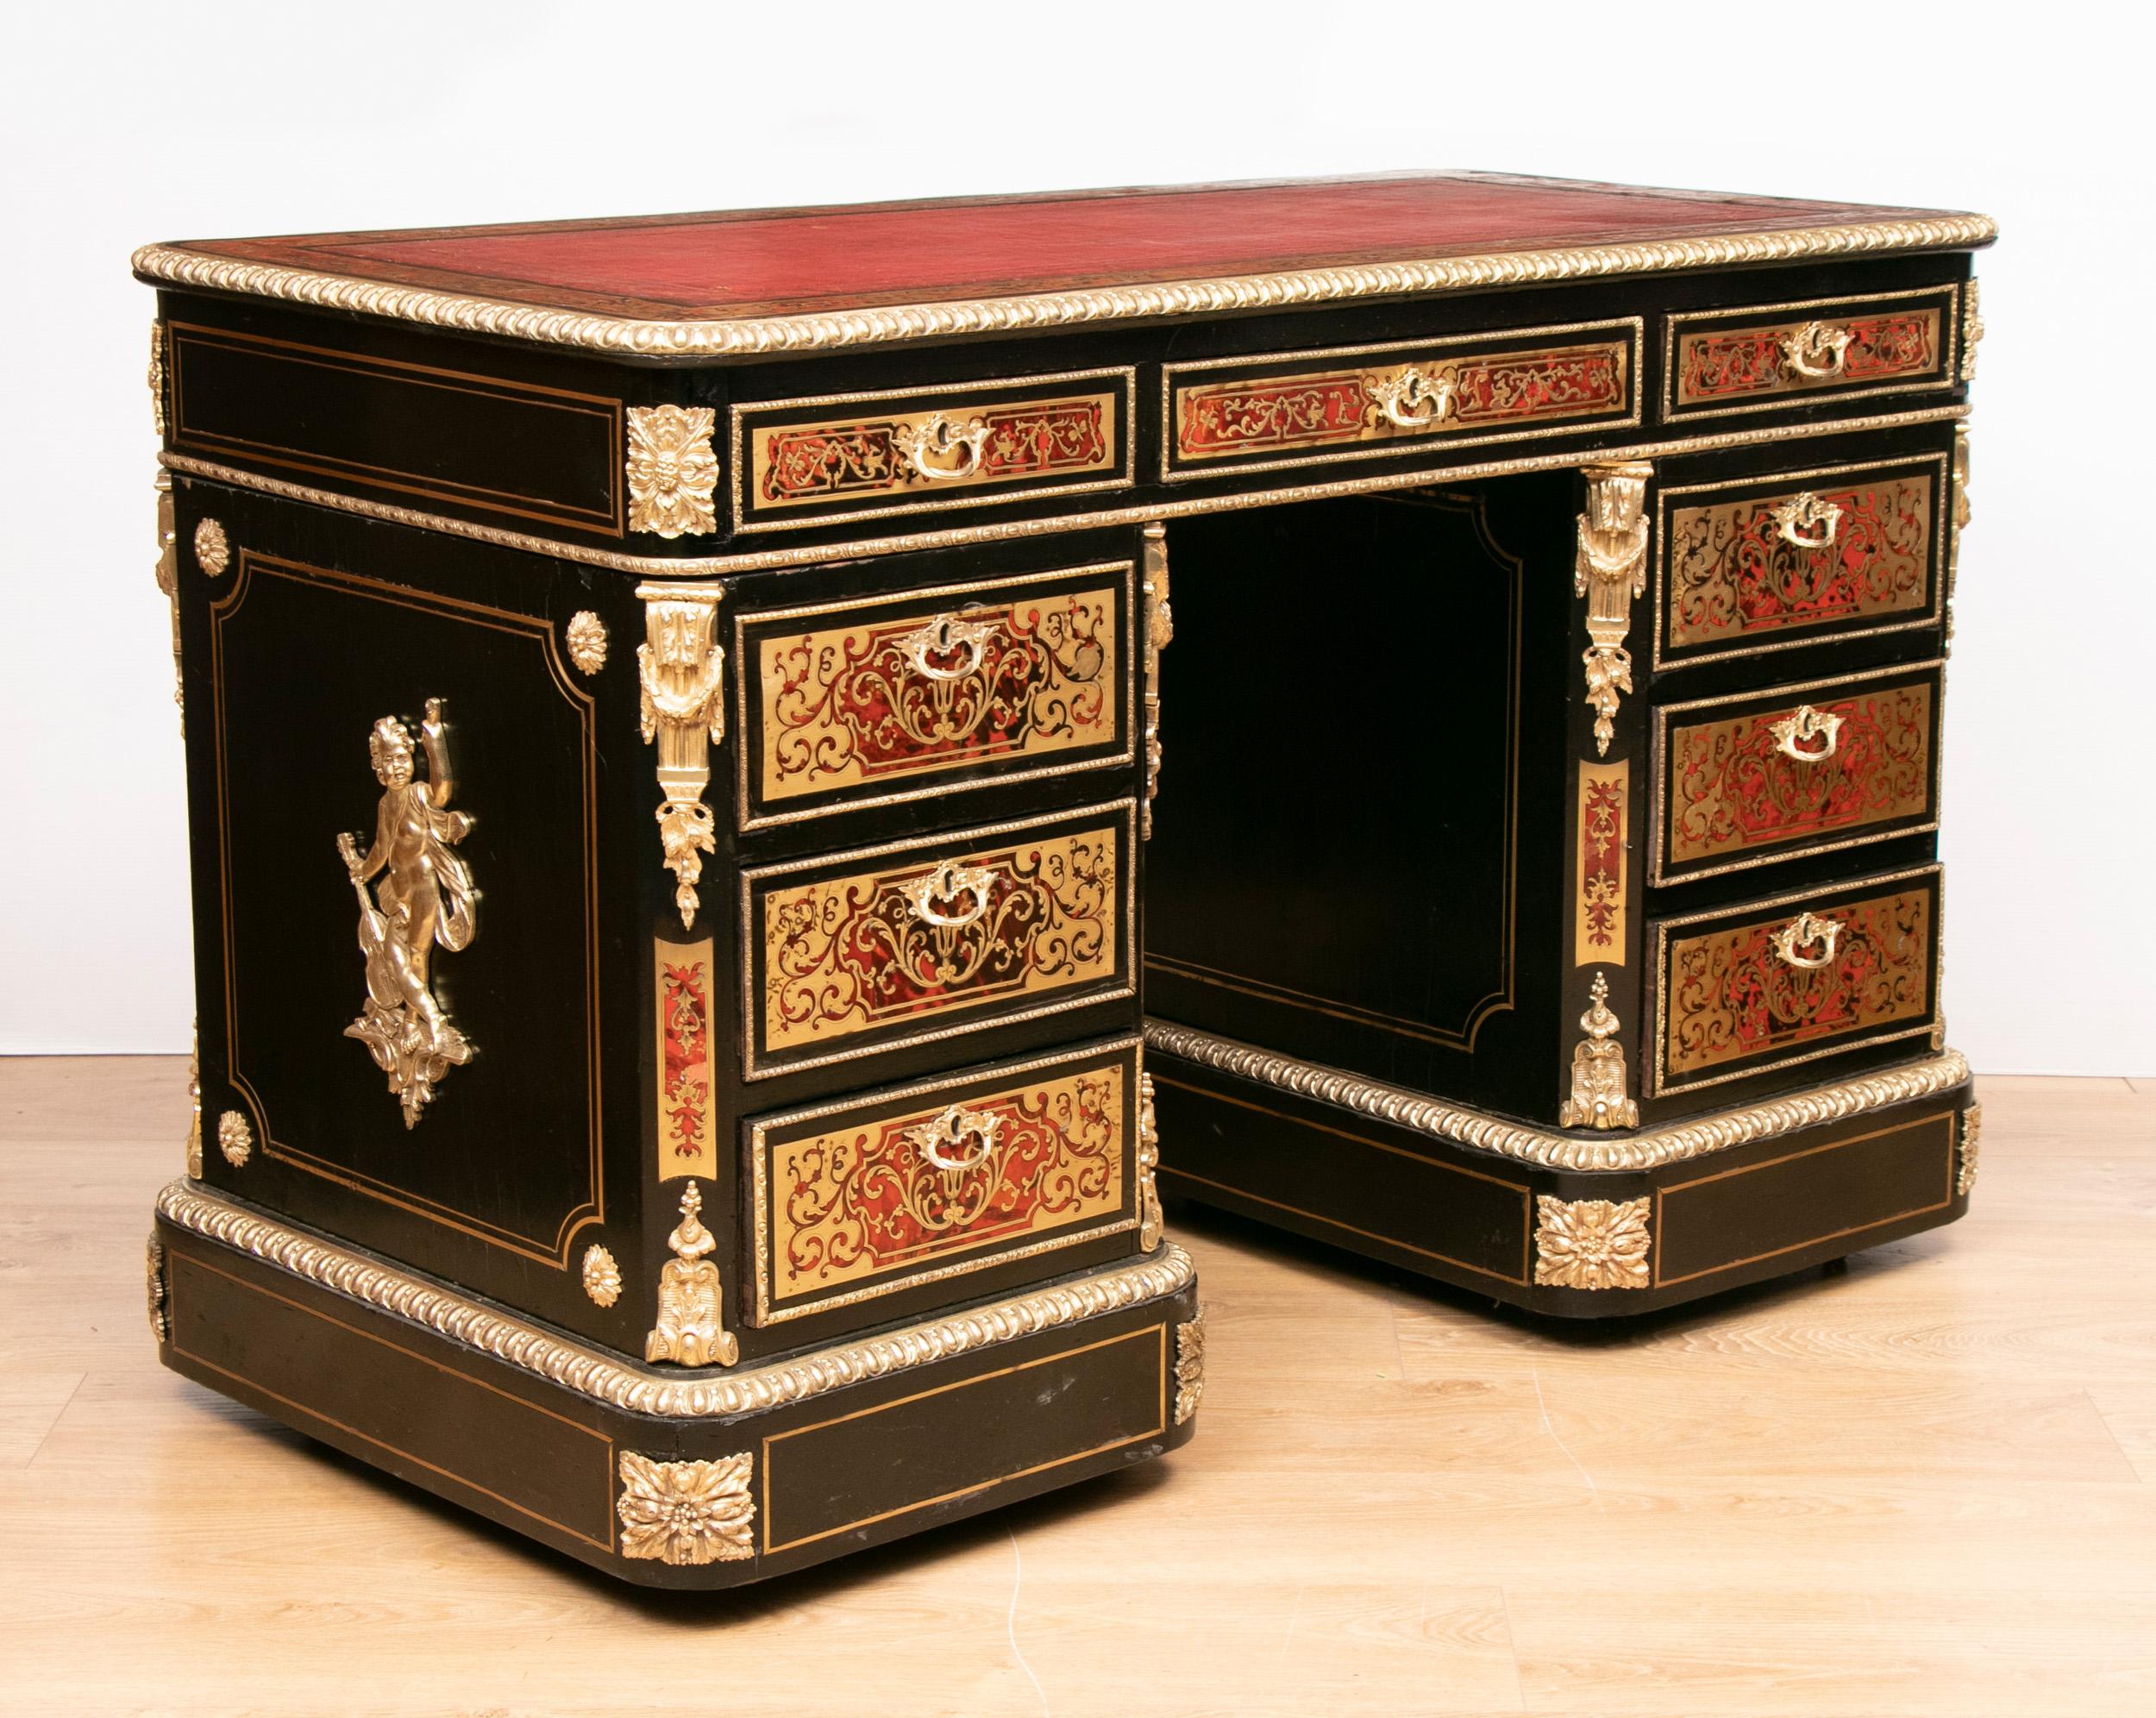 A very distinctive ebonized desk, inlaid with engraved brass on red tortoiseshell panels. Decorative gilt metal mounts demonstrate outstanding craftsmanship. The top has three frieze drawers and red leather writing surface. There are three further